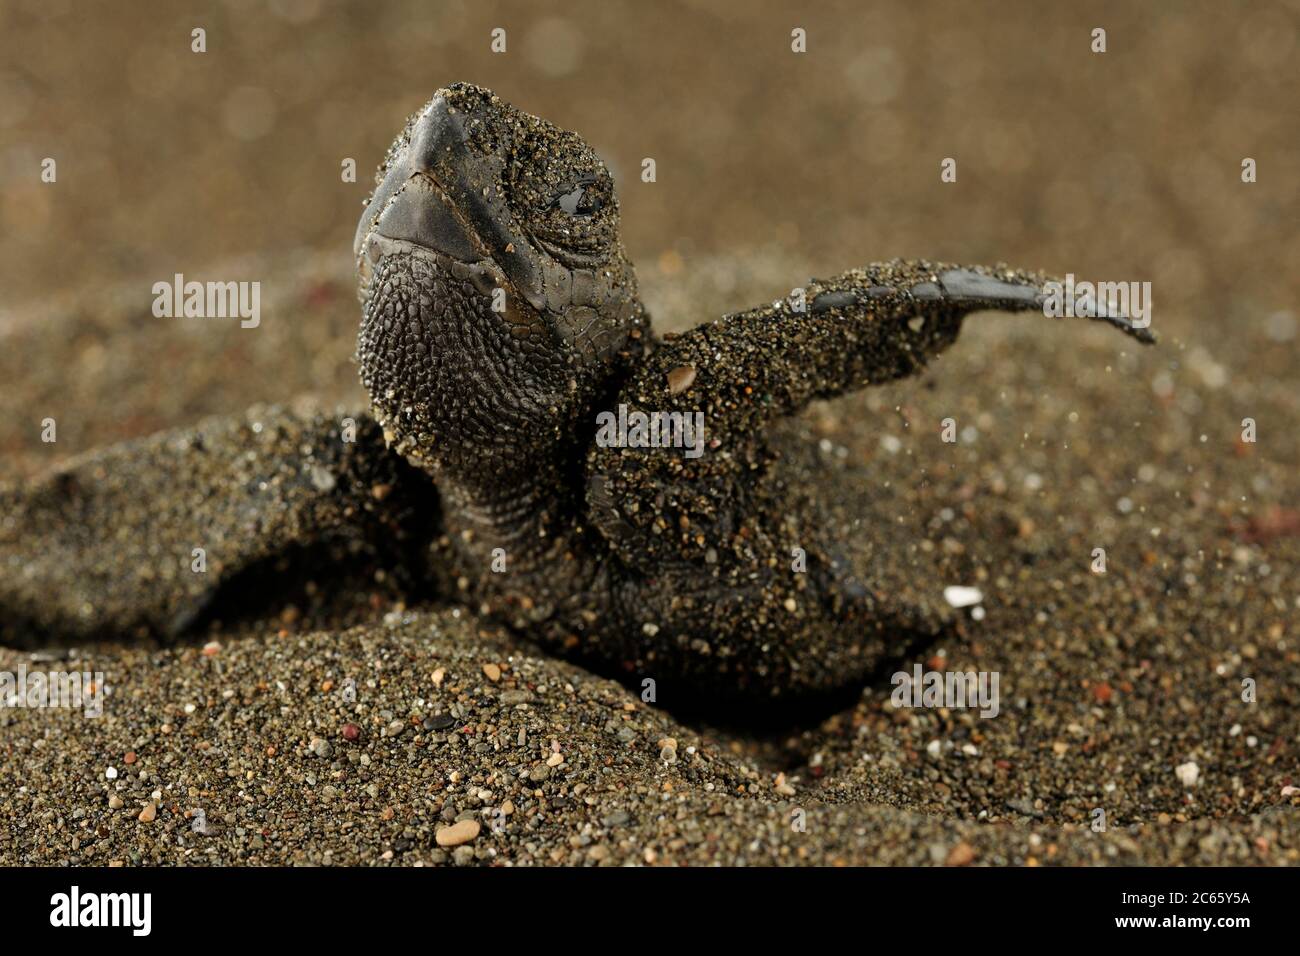 After an incubation period of 45 to 55 days a first hatchling olive ridley (Lepidochelys olivacea) emerges out of the sand. Stock Photo